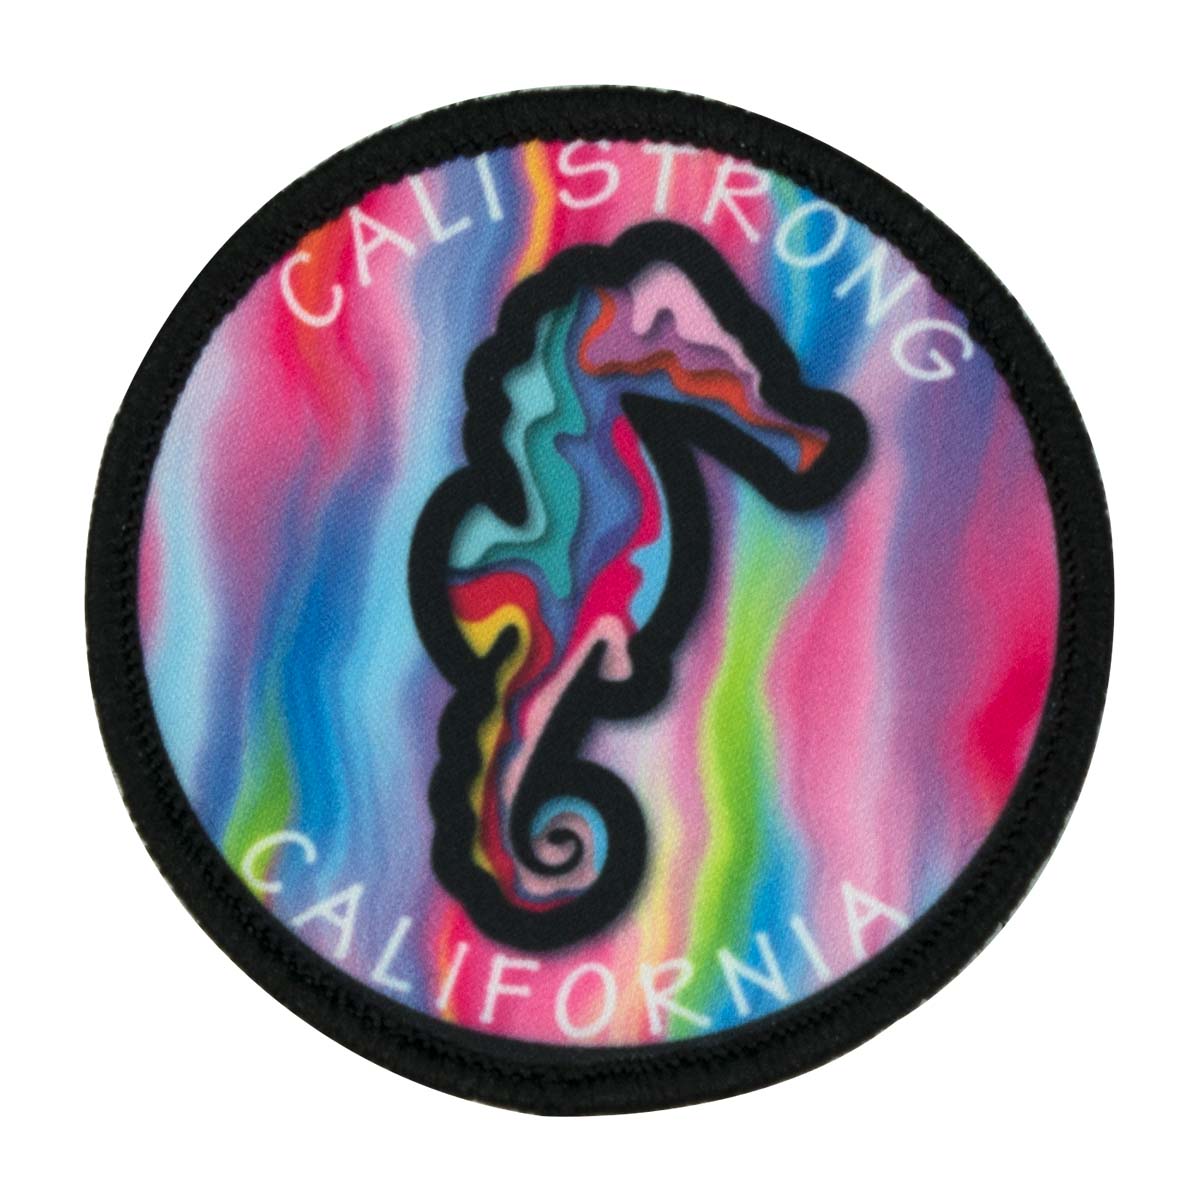 CALI Strong California Sea Horse Round Hook-and-Loop Morale Patch - Patches - Image 1 - CALI Strong